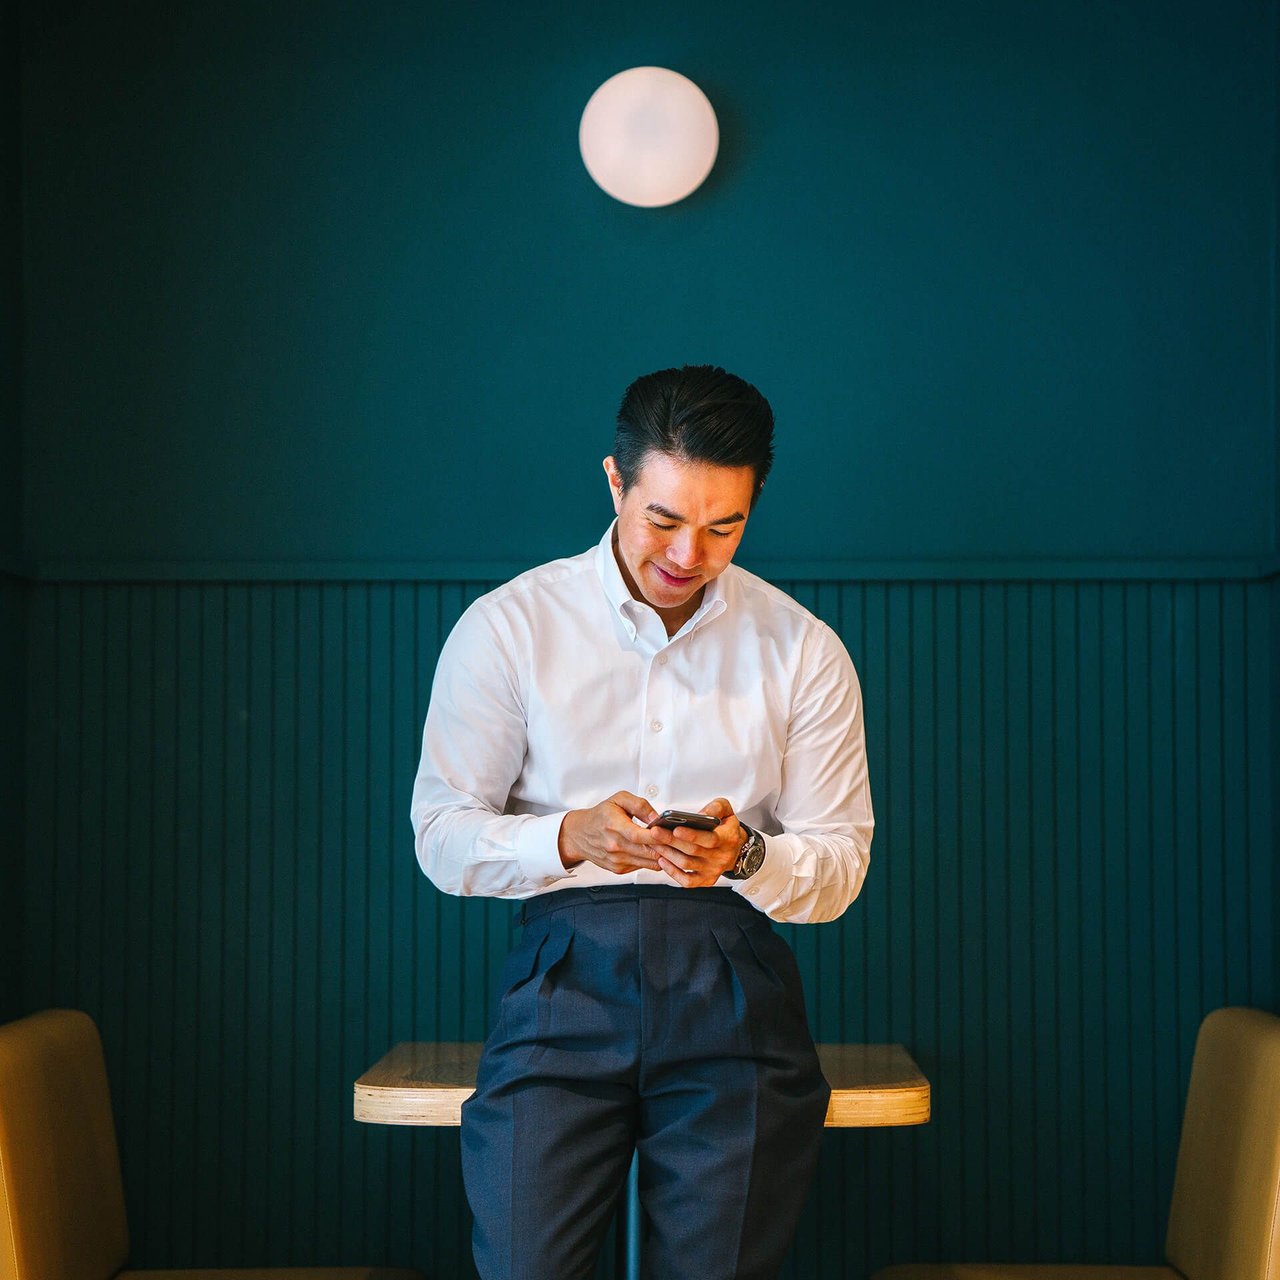 Man checking his smartphone while waiting in a restaurant